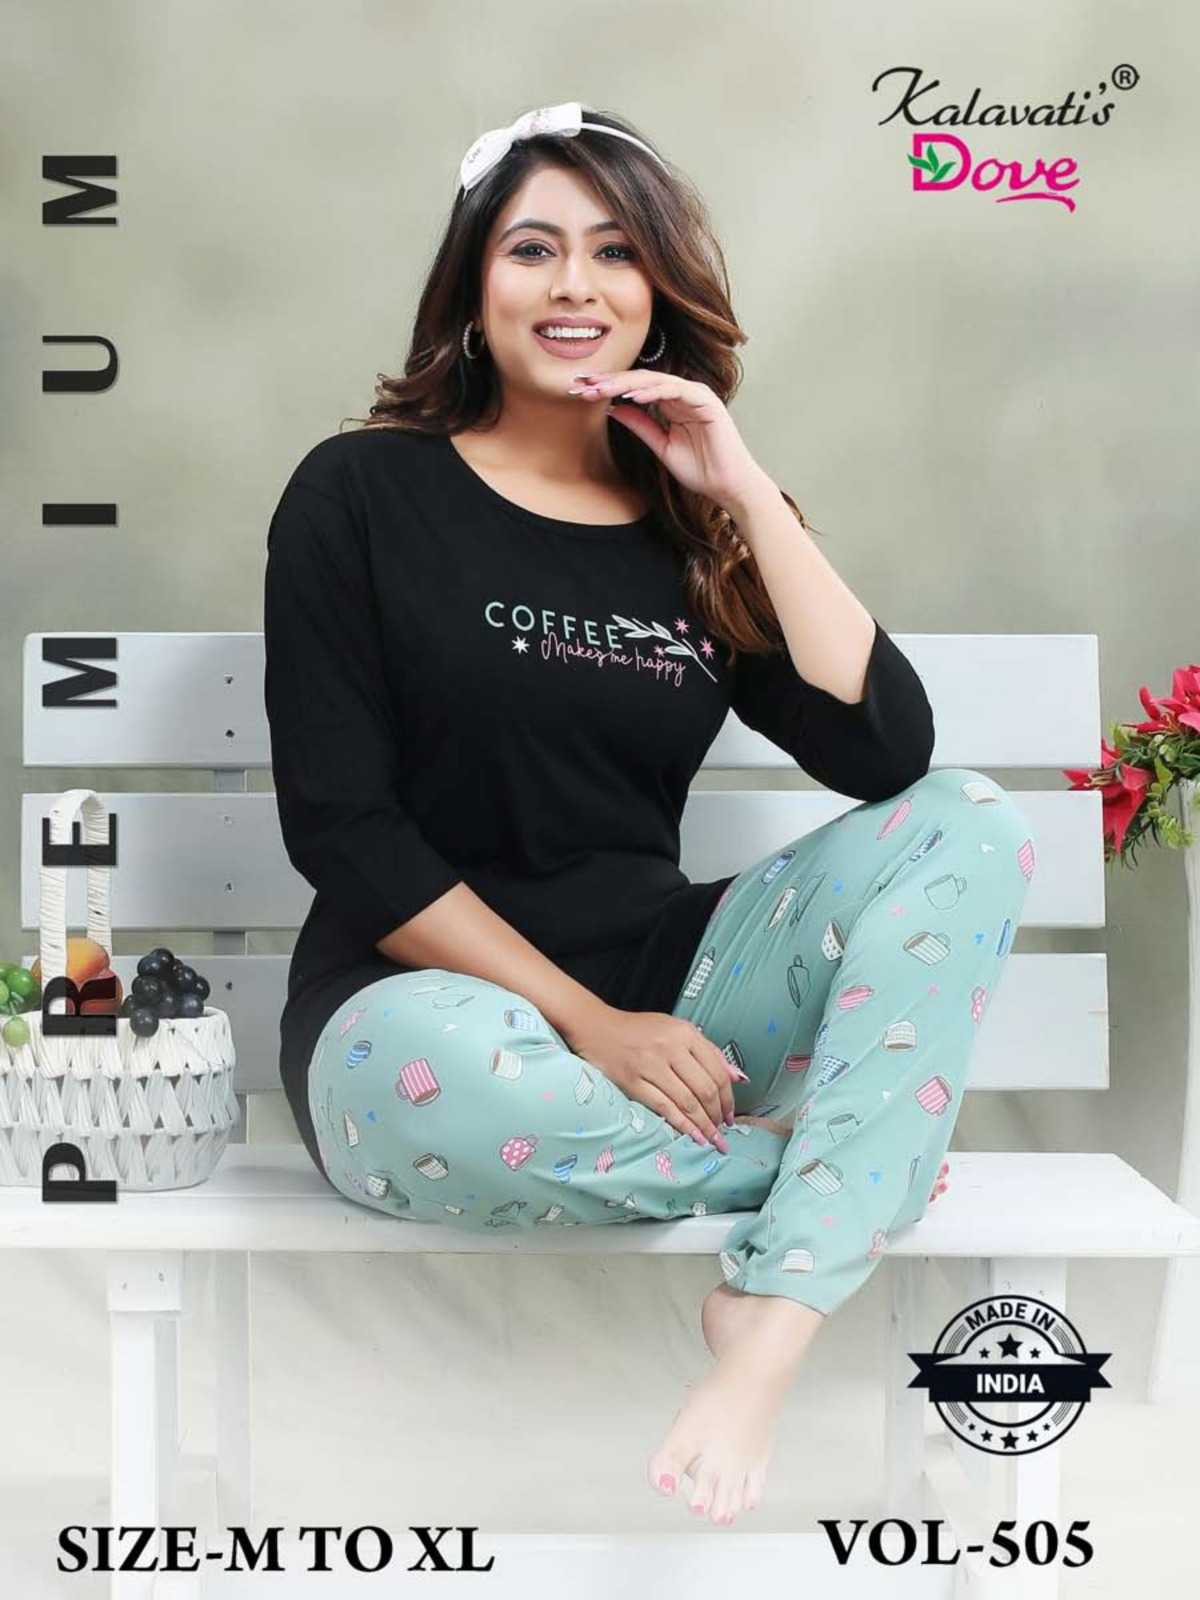 Kalavati dove vol 320 daily wear readymade co-ord sets collection